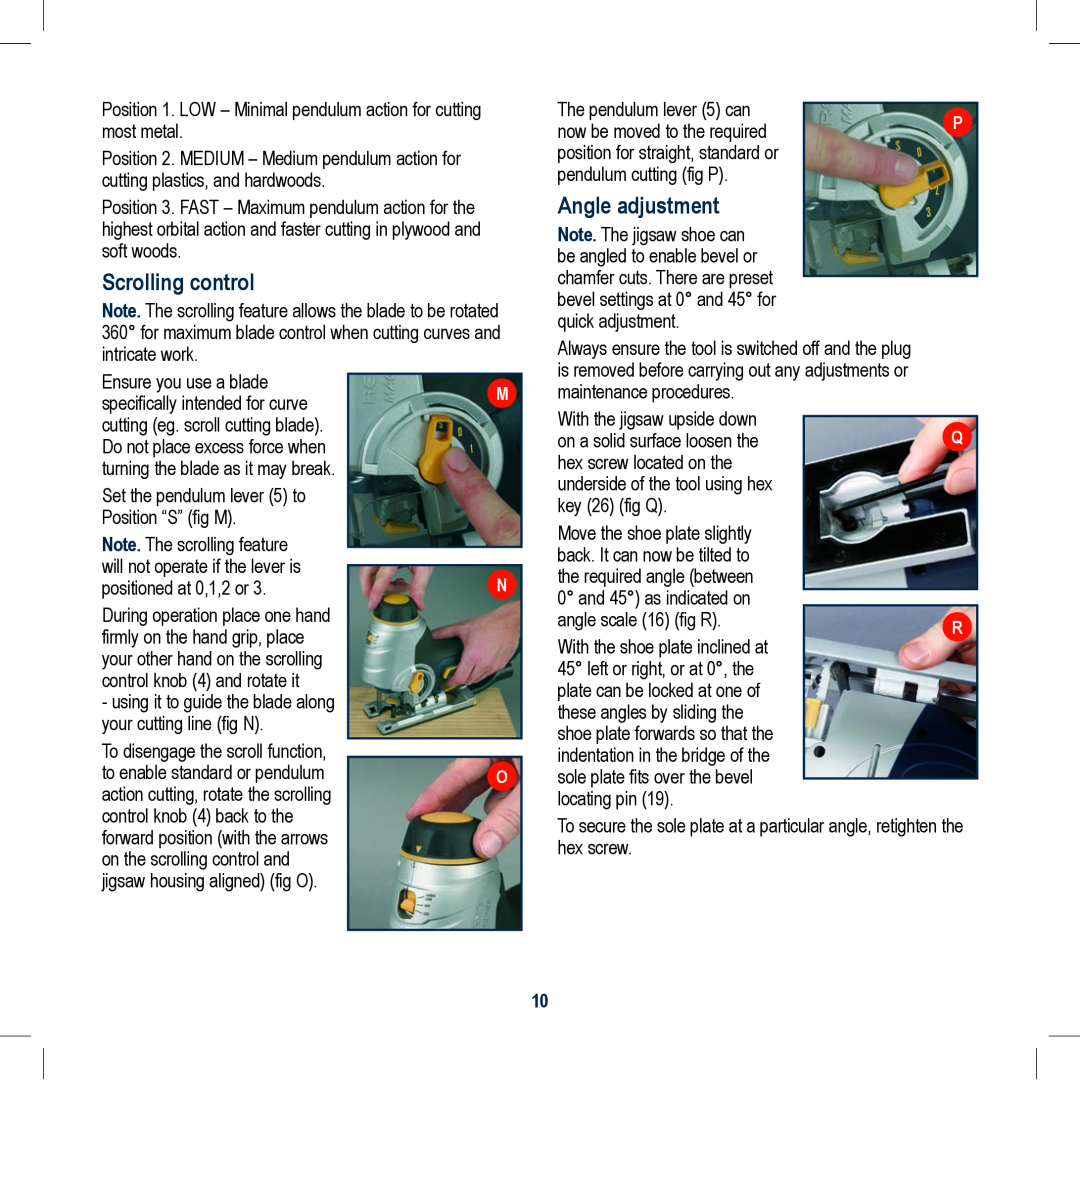 Global Machinery Company SPJ2HM instruction manual Scrolling control, Angle adjustment 